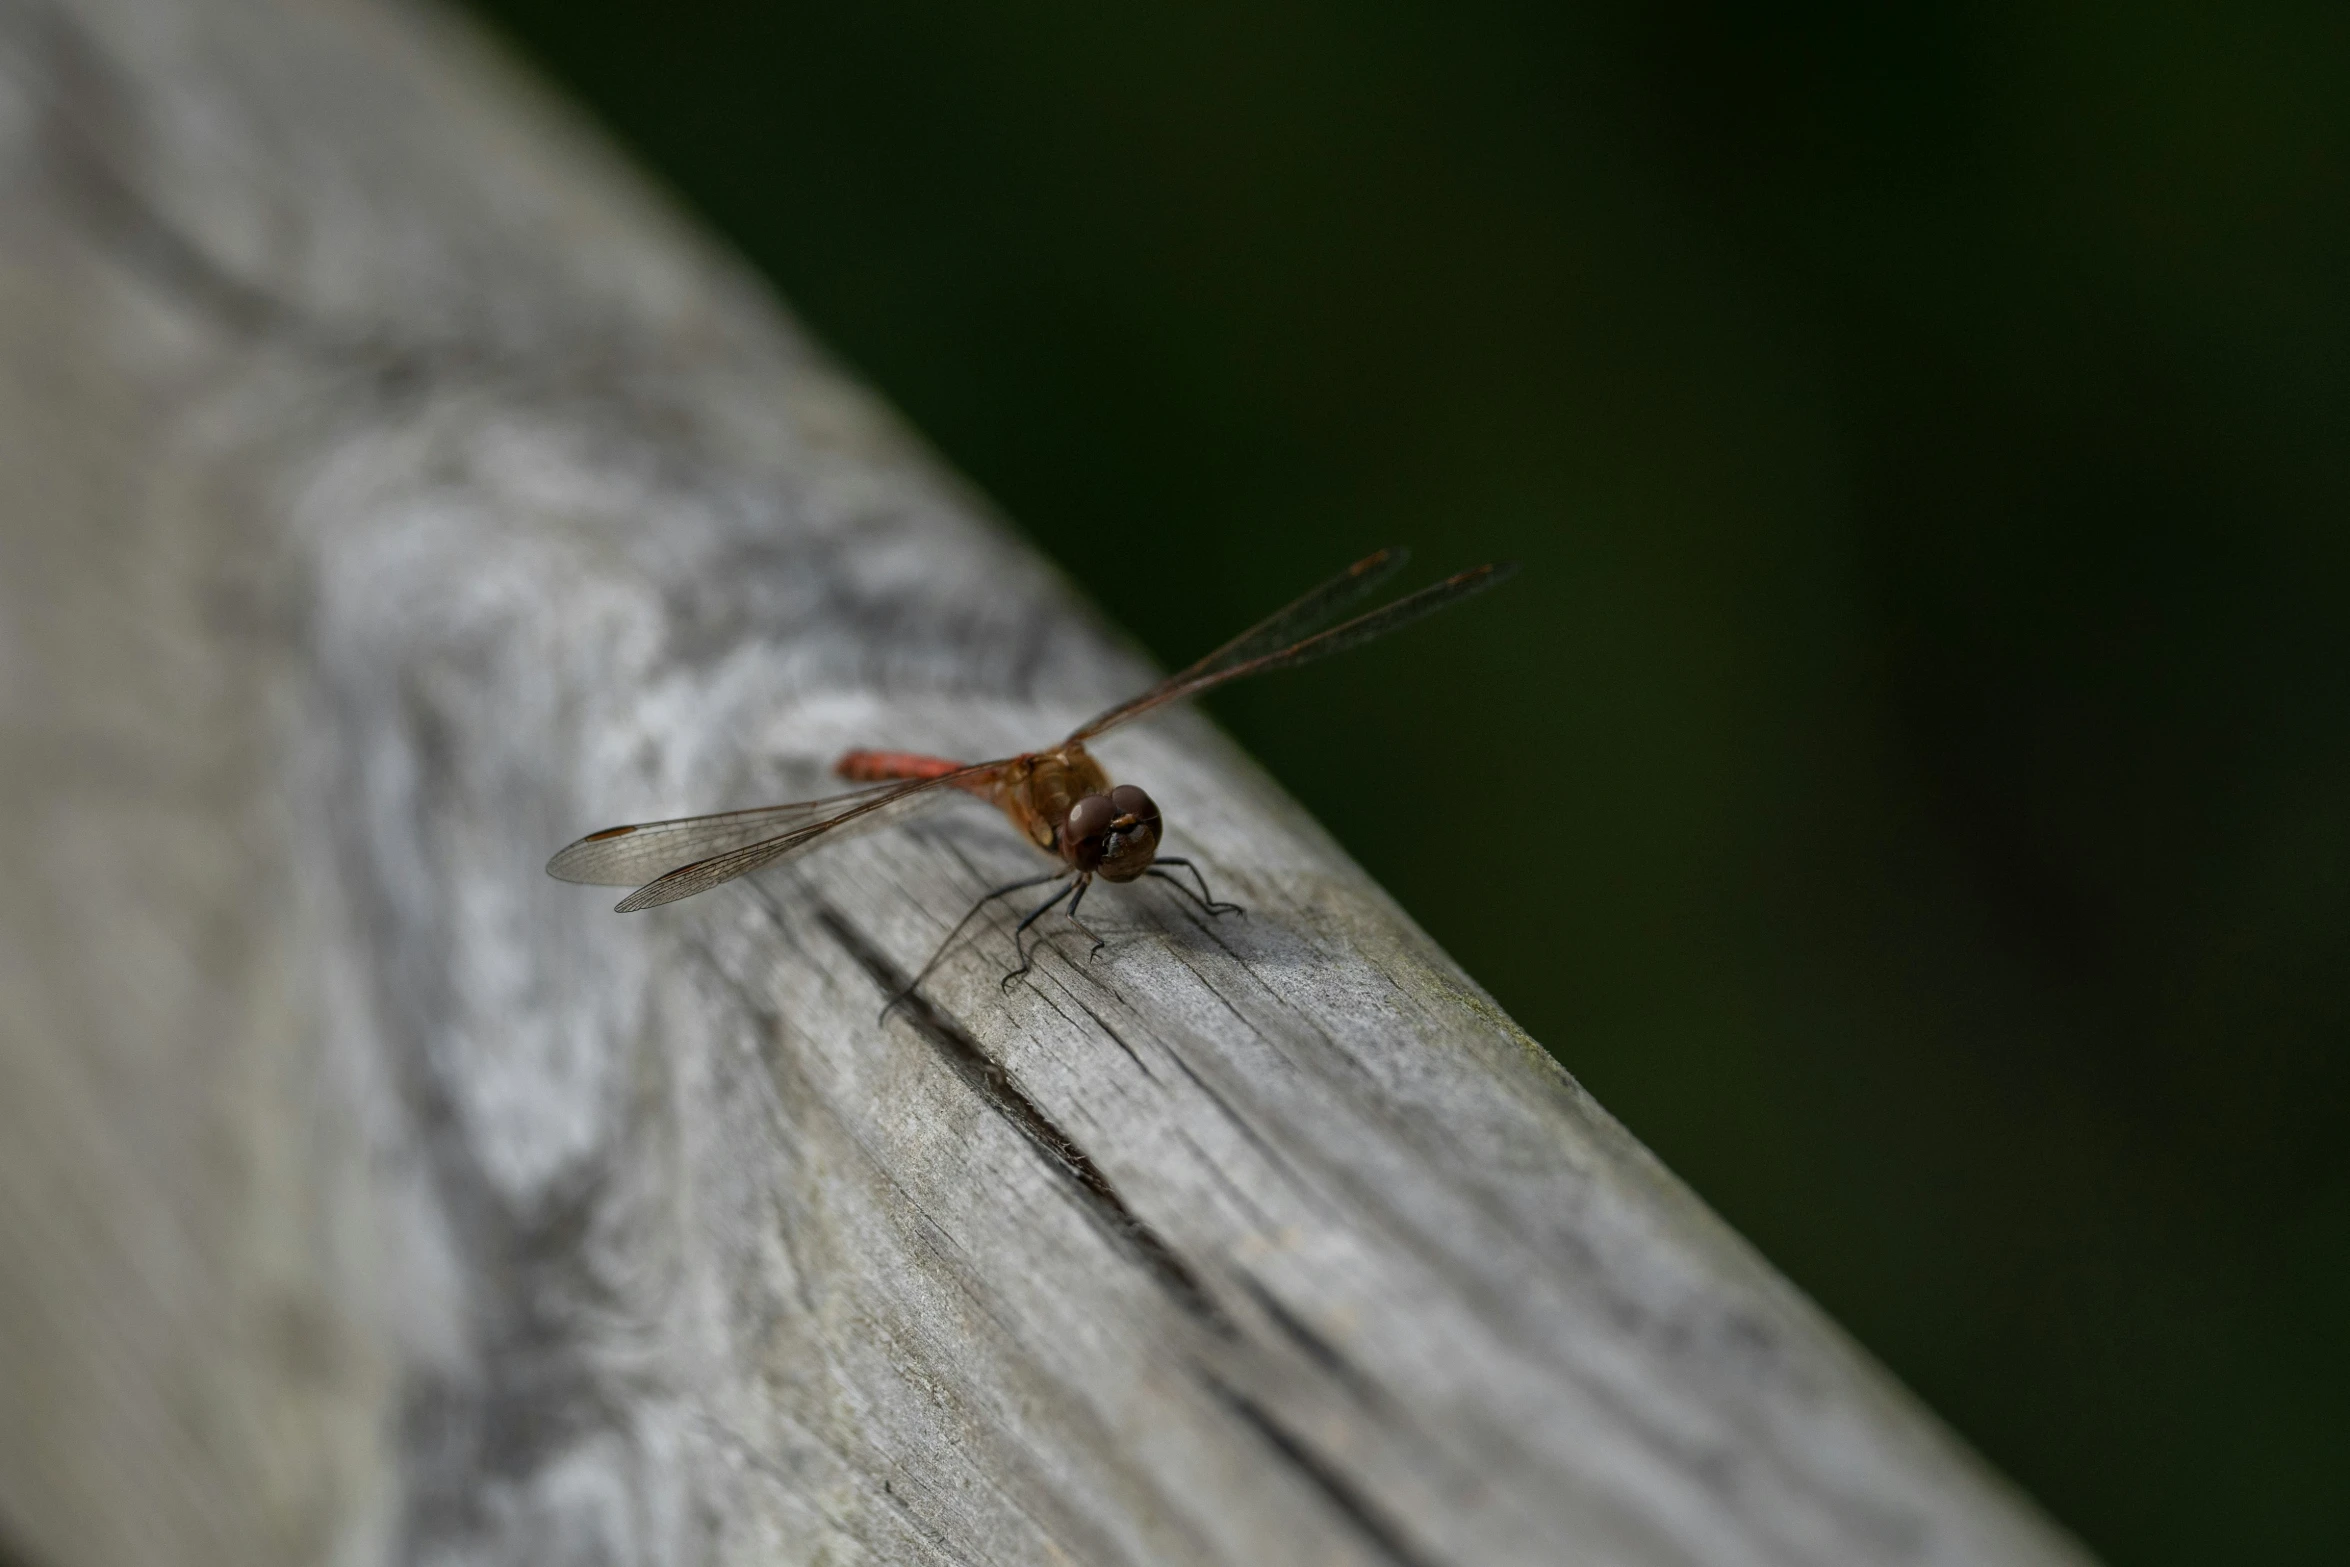 the dragonfly is resting on a piece of wood